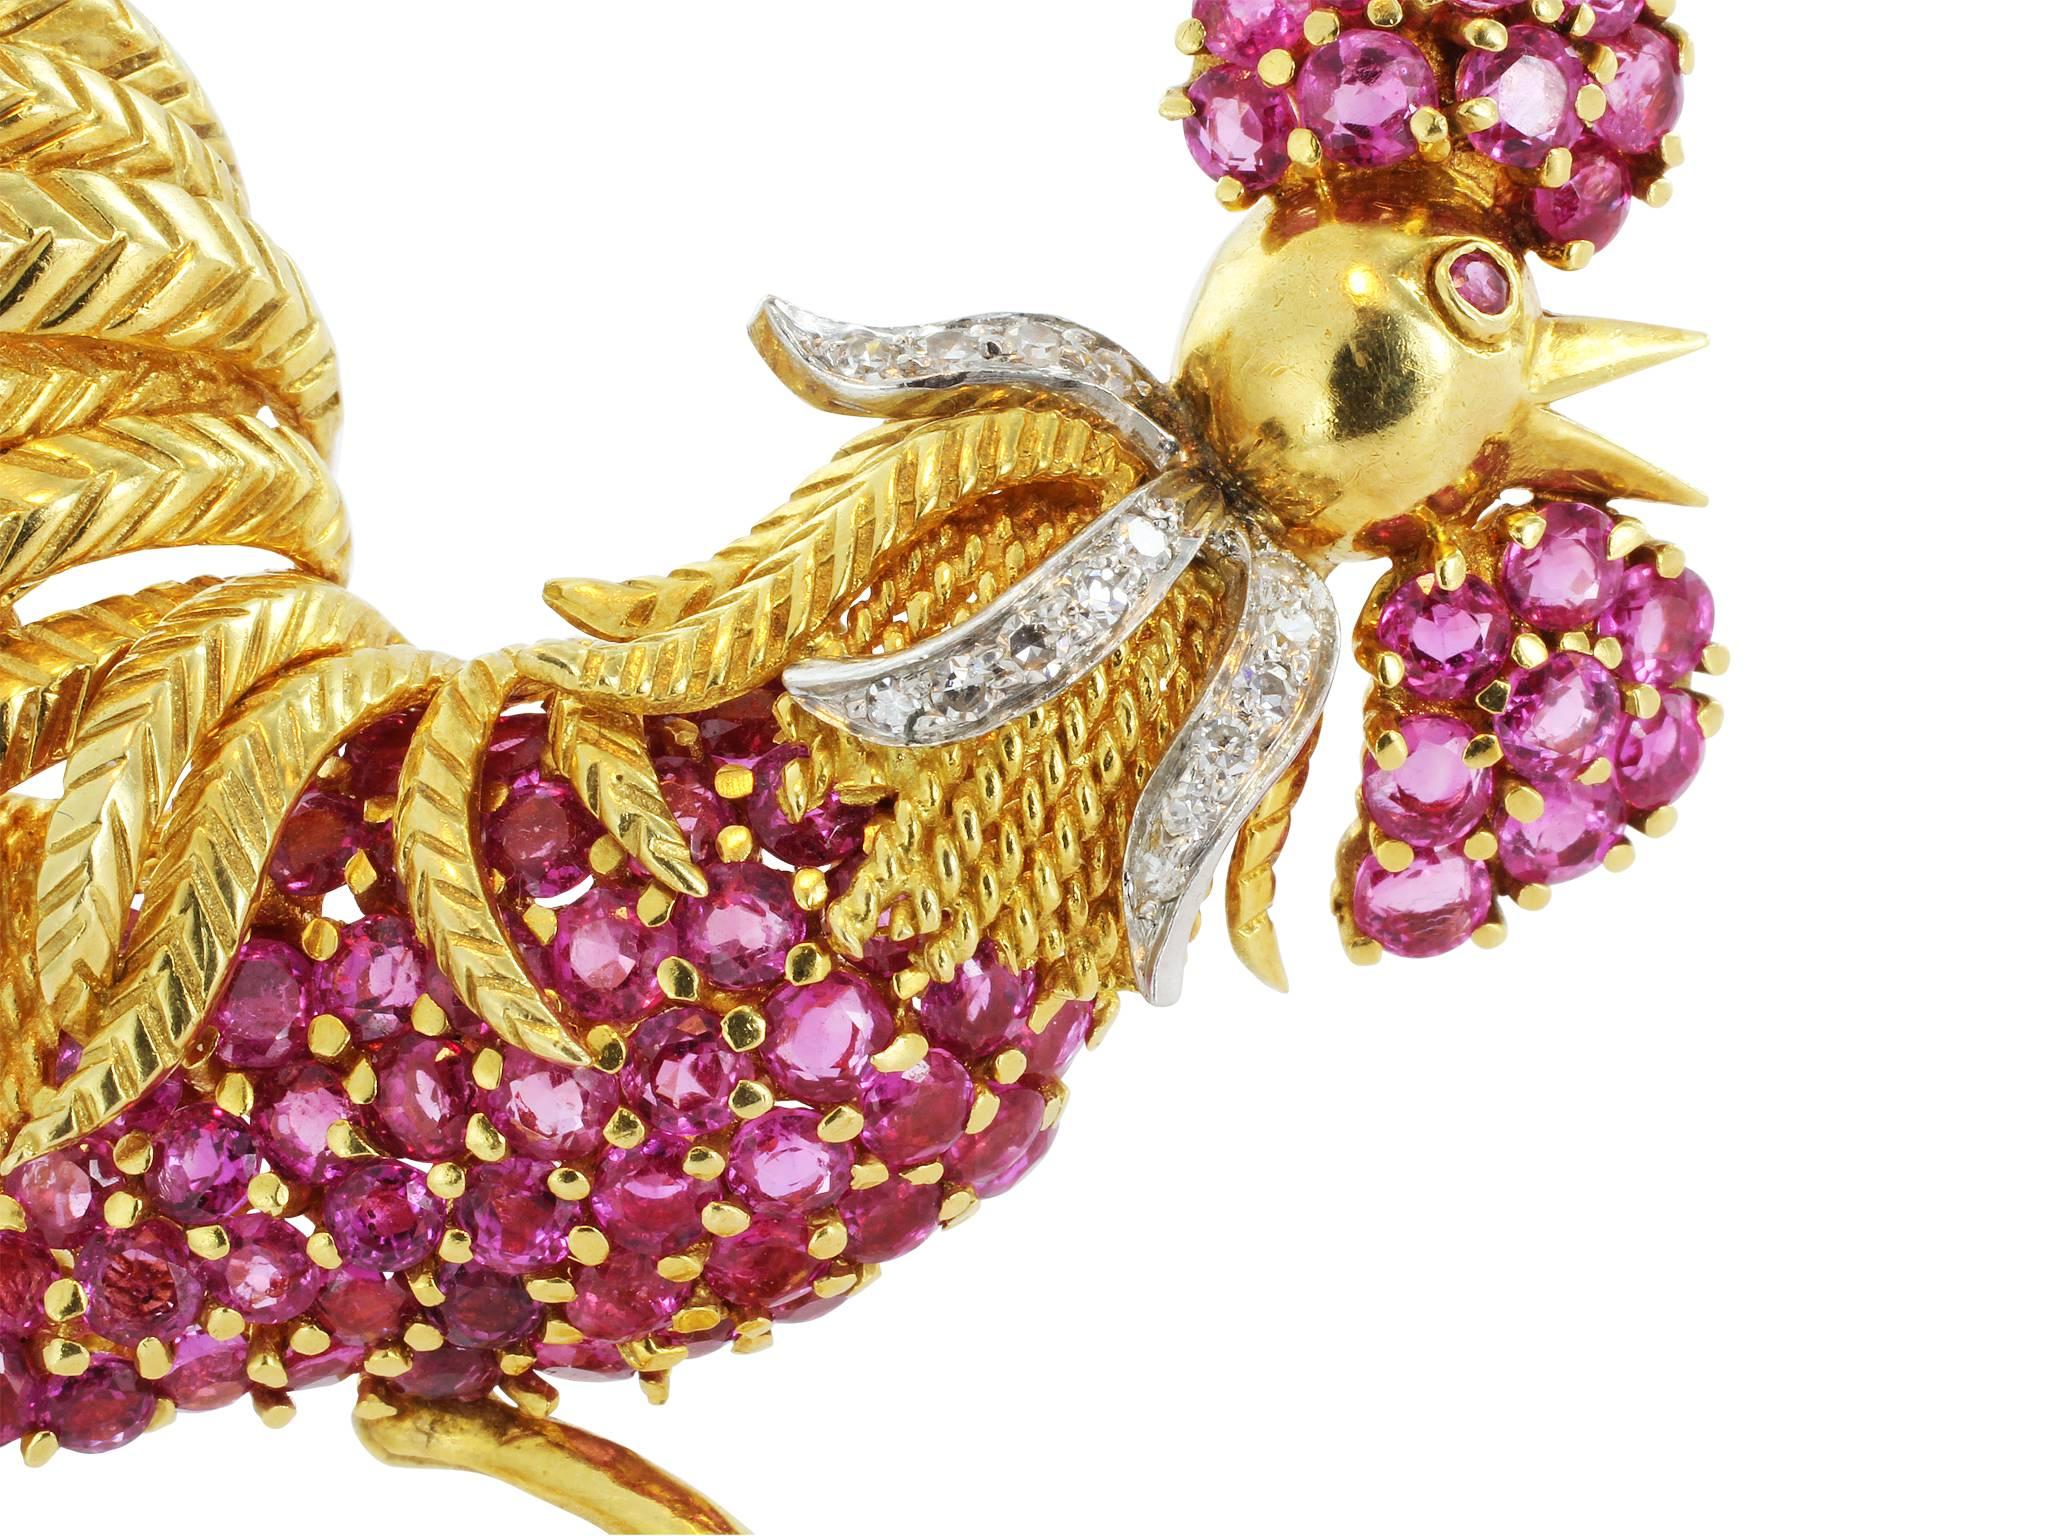 Platinum & 18kt yellow gold vintage rooster pin consisting of approximately 3.20 carats total weight of Burma rubies and approximately .28 carats carats of single cut diamonds.